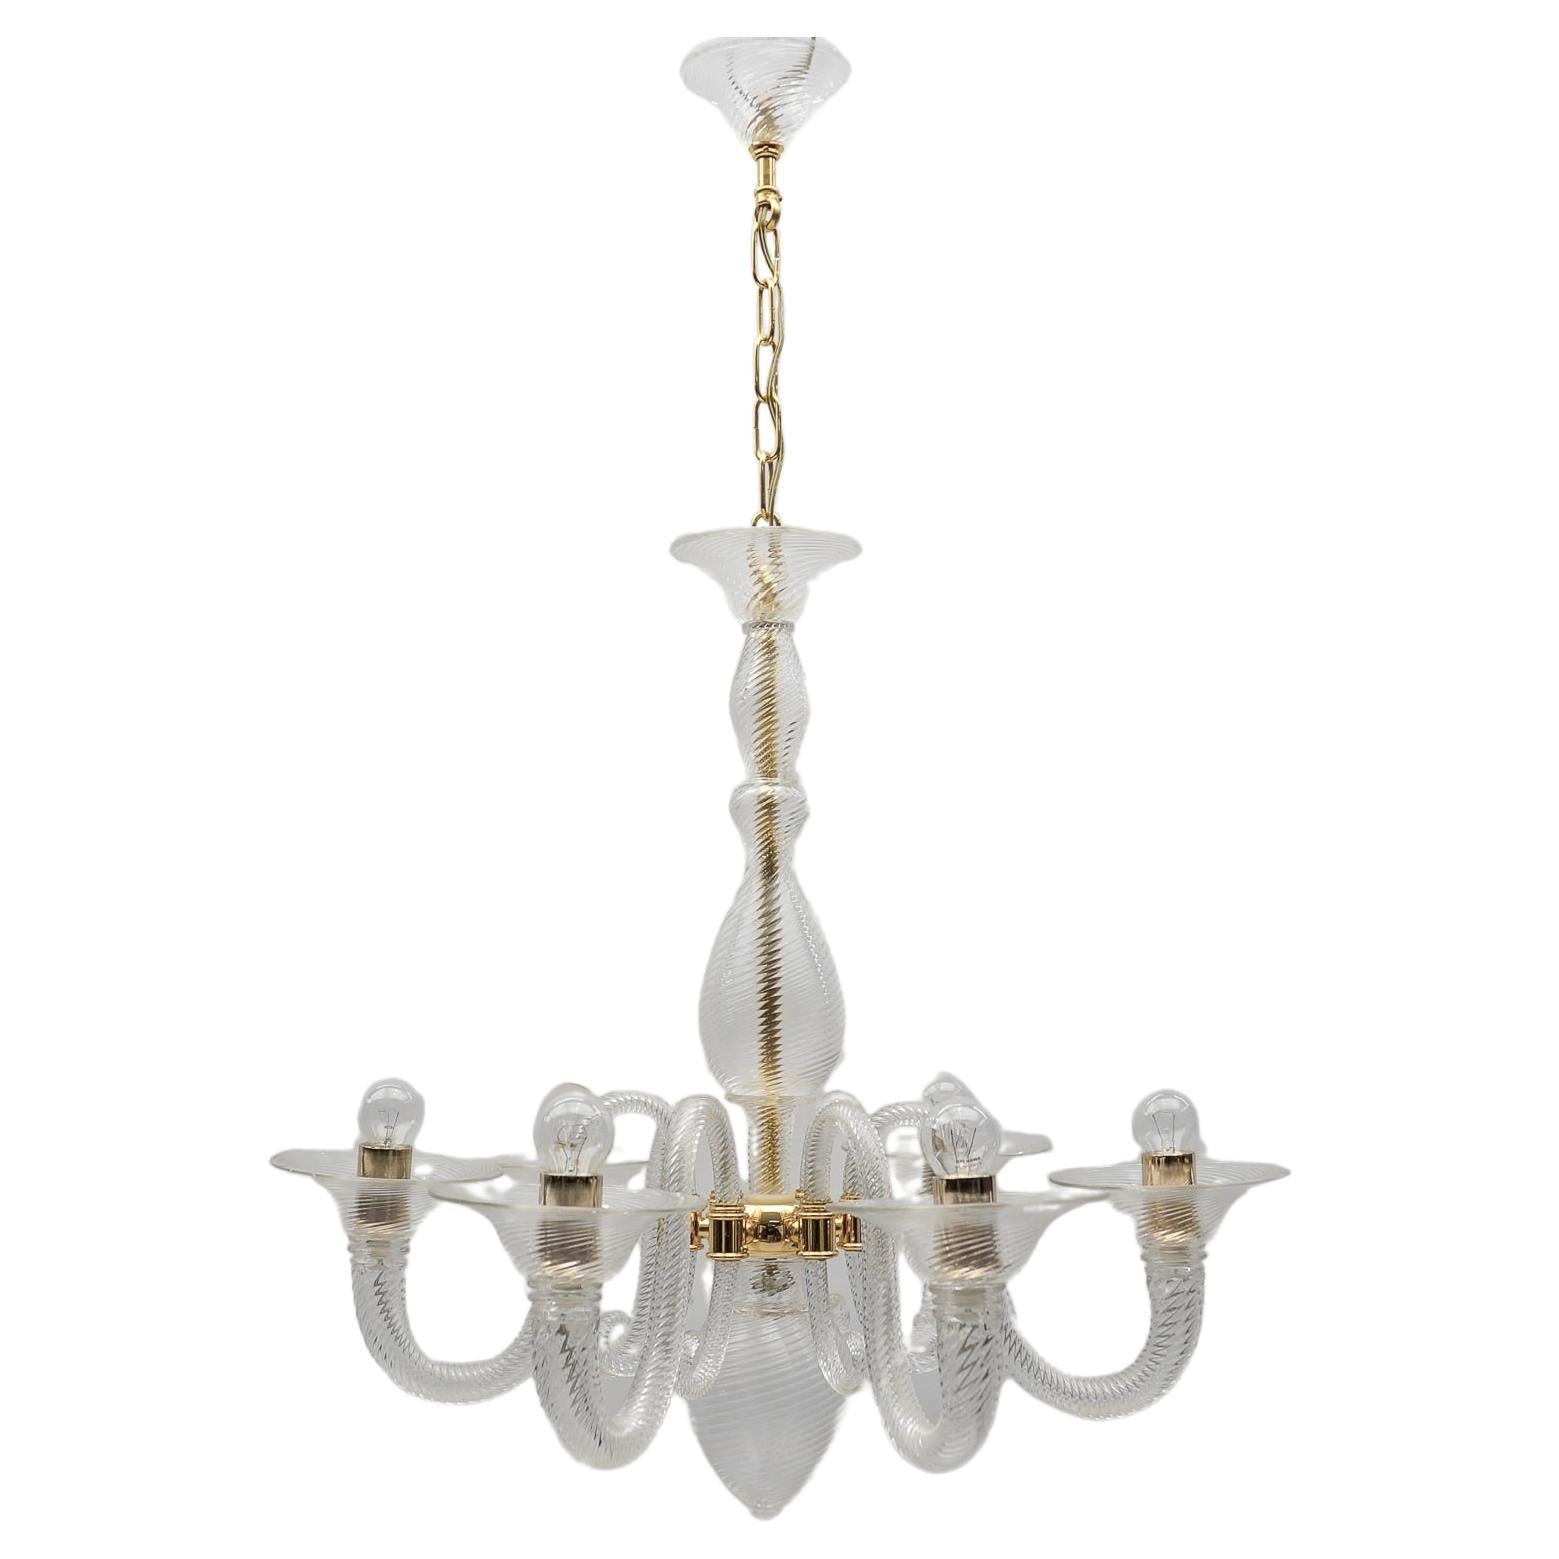 Awesome Barovier & Toso Chandelier, Murano Glass Italy  For Sale